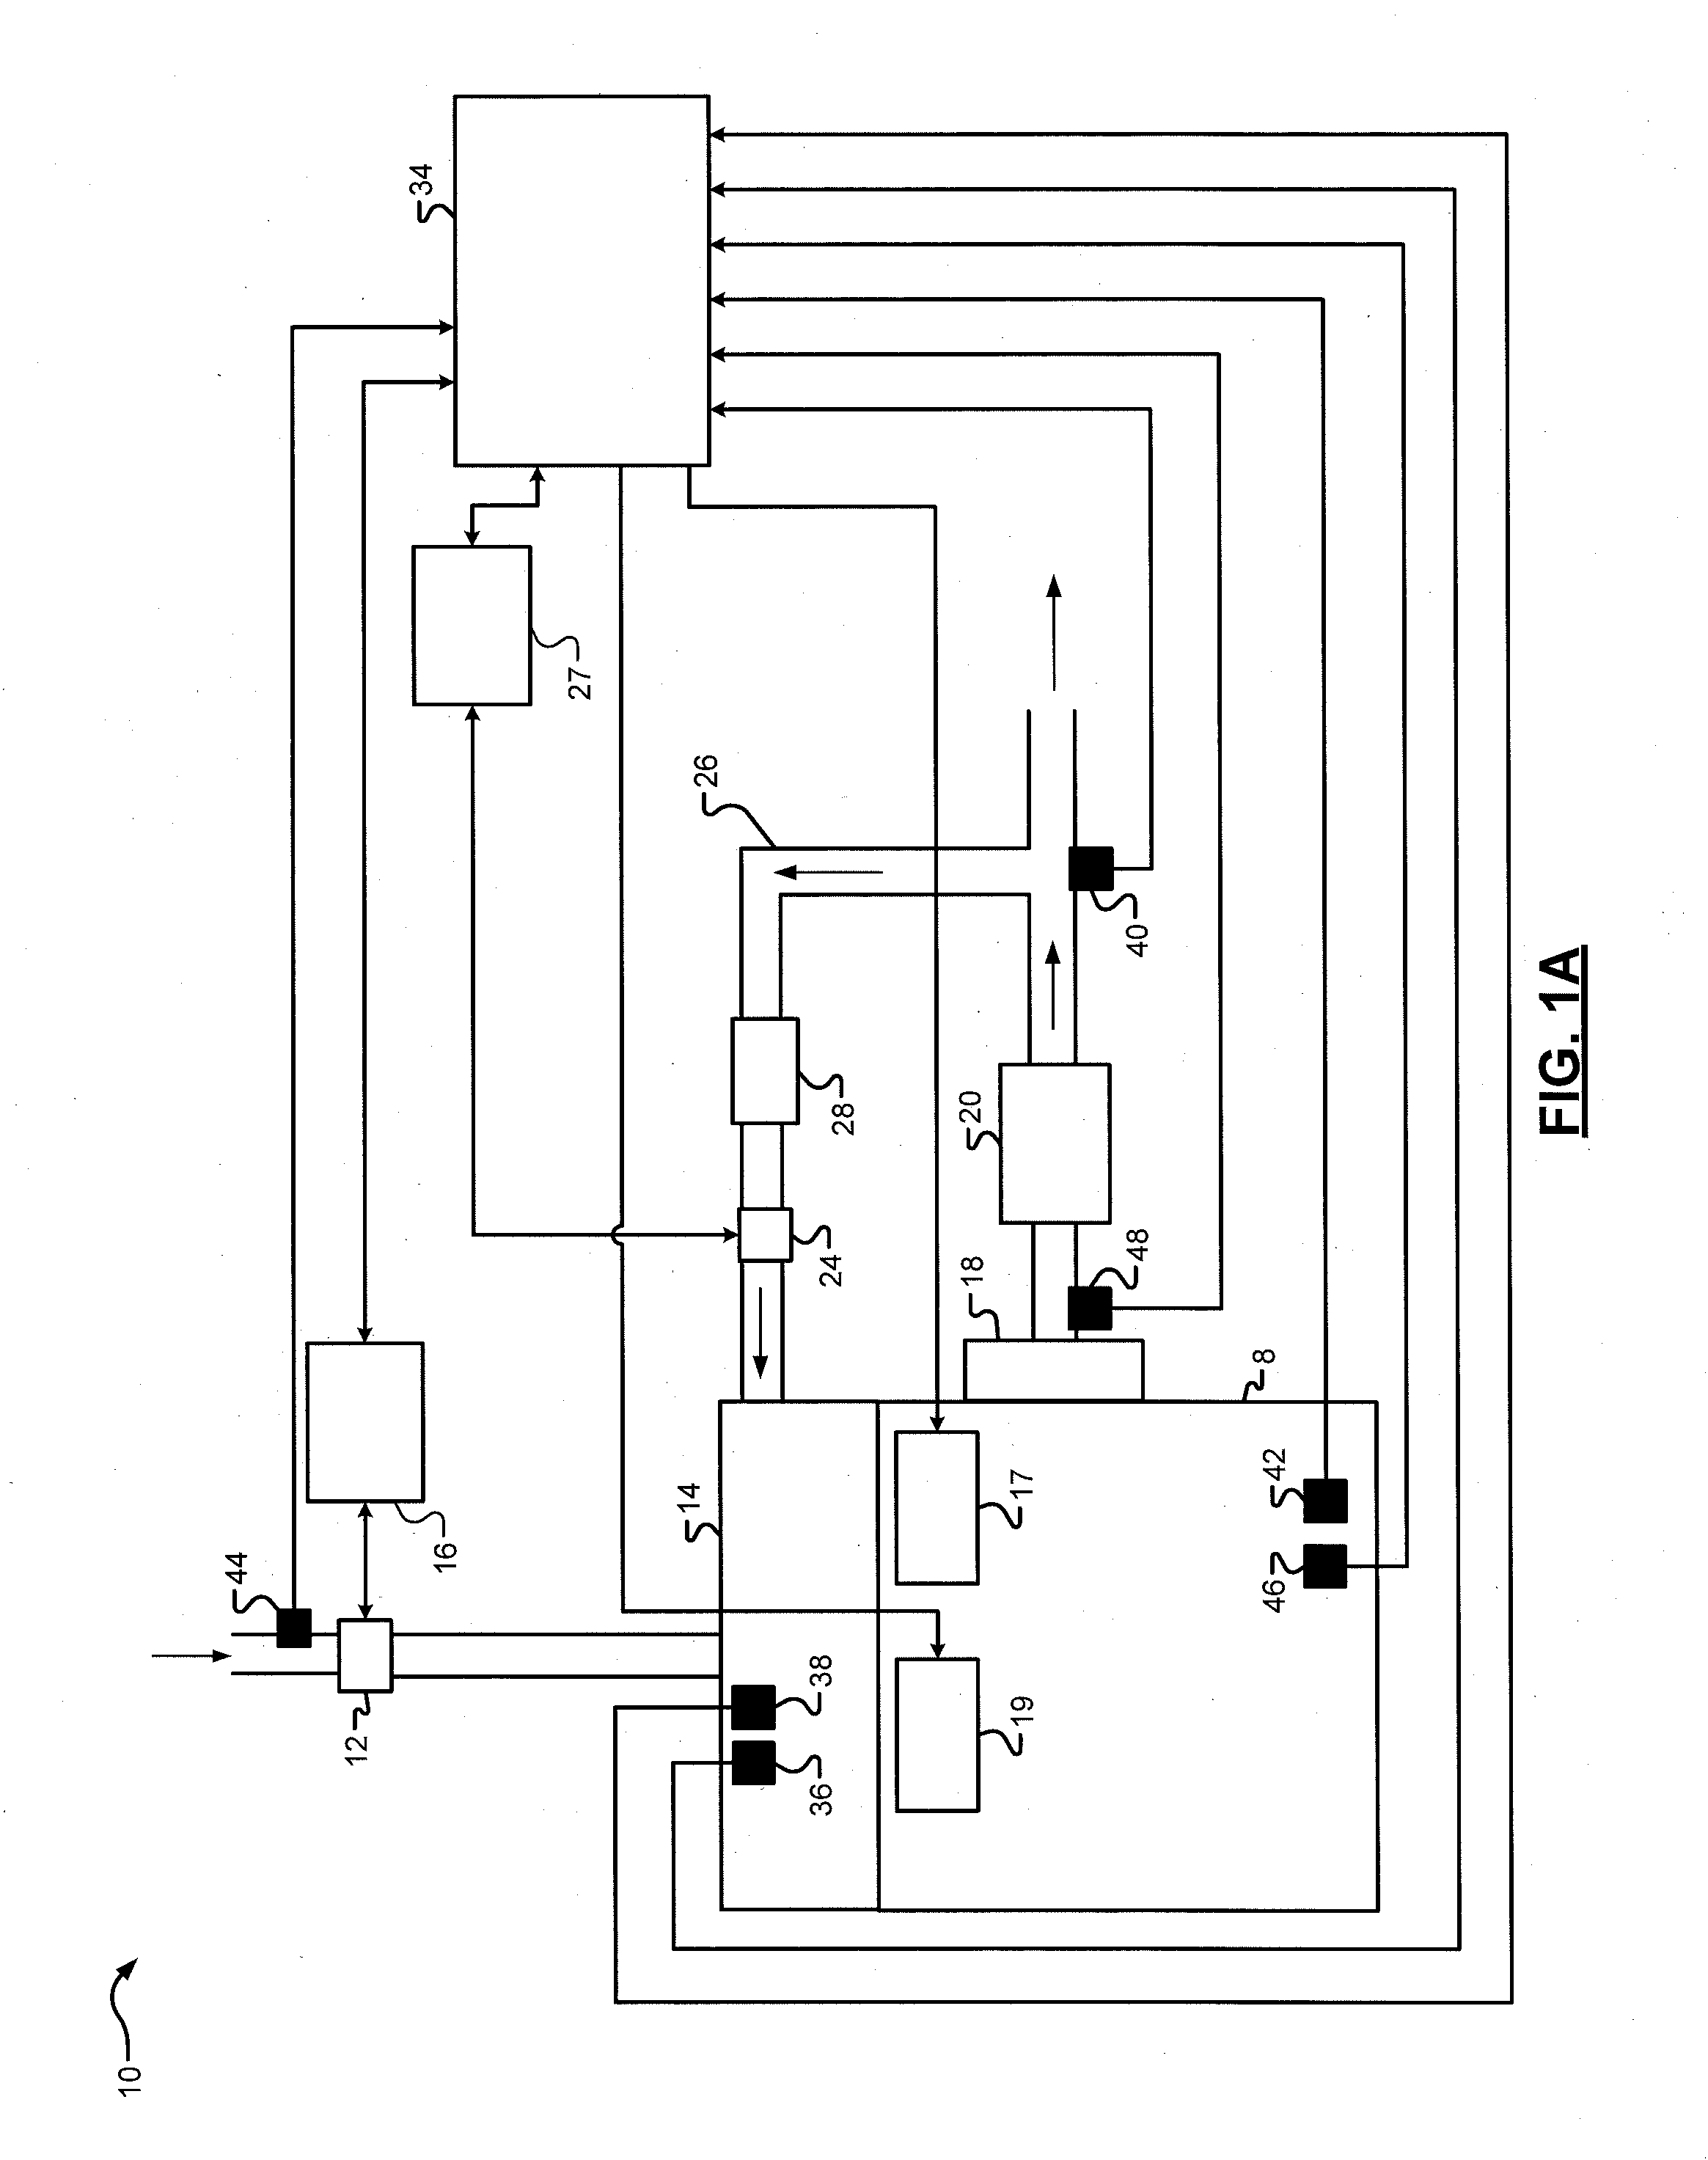 Exhaust gas recirculation control systems and methods for low engine delta pressure conditions